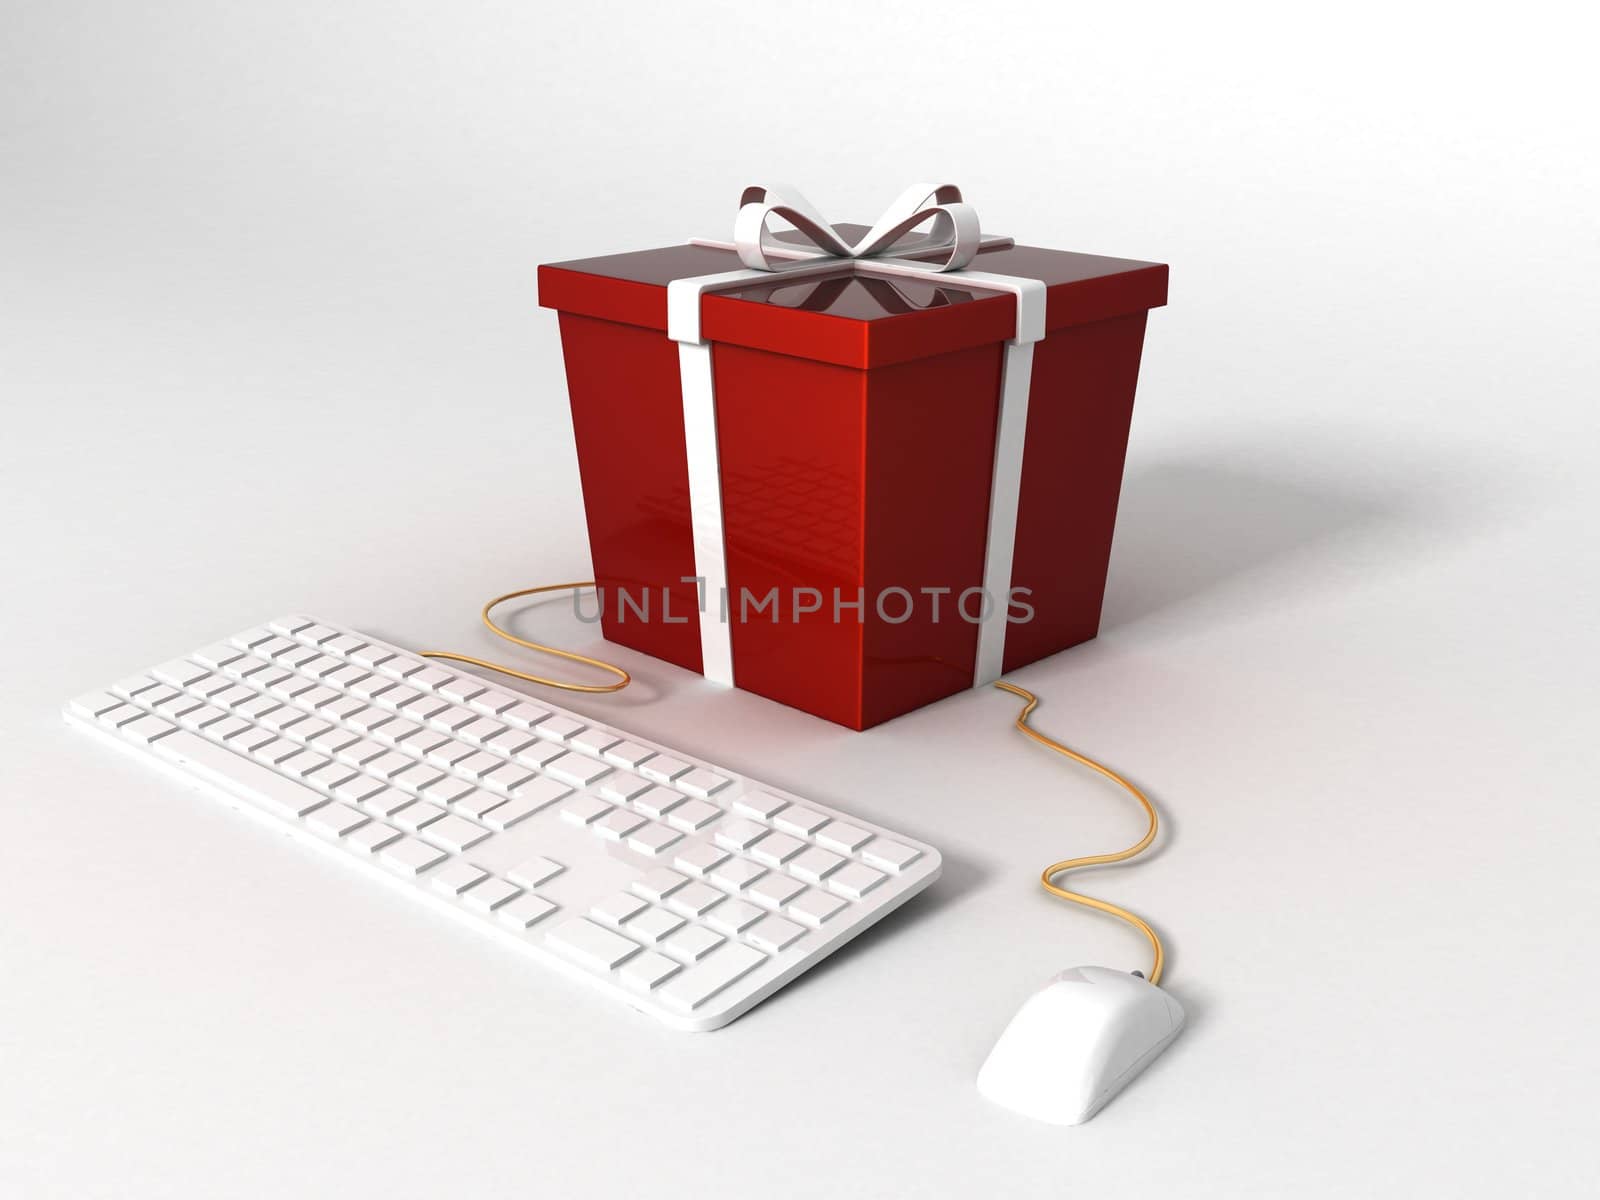  three dimensional  keyboard ,mouse and wrapped gift by imagerymajestic